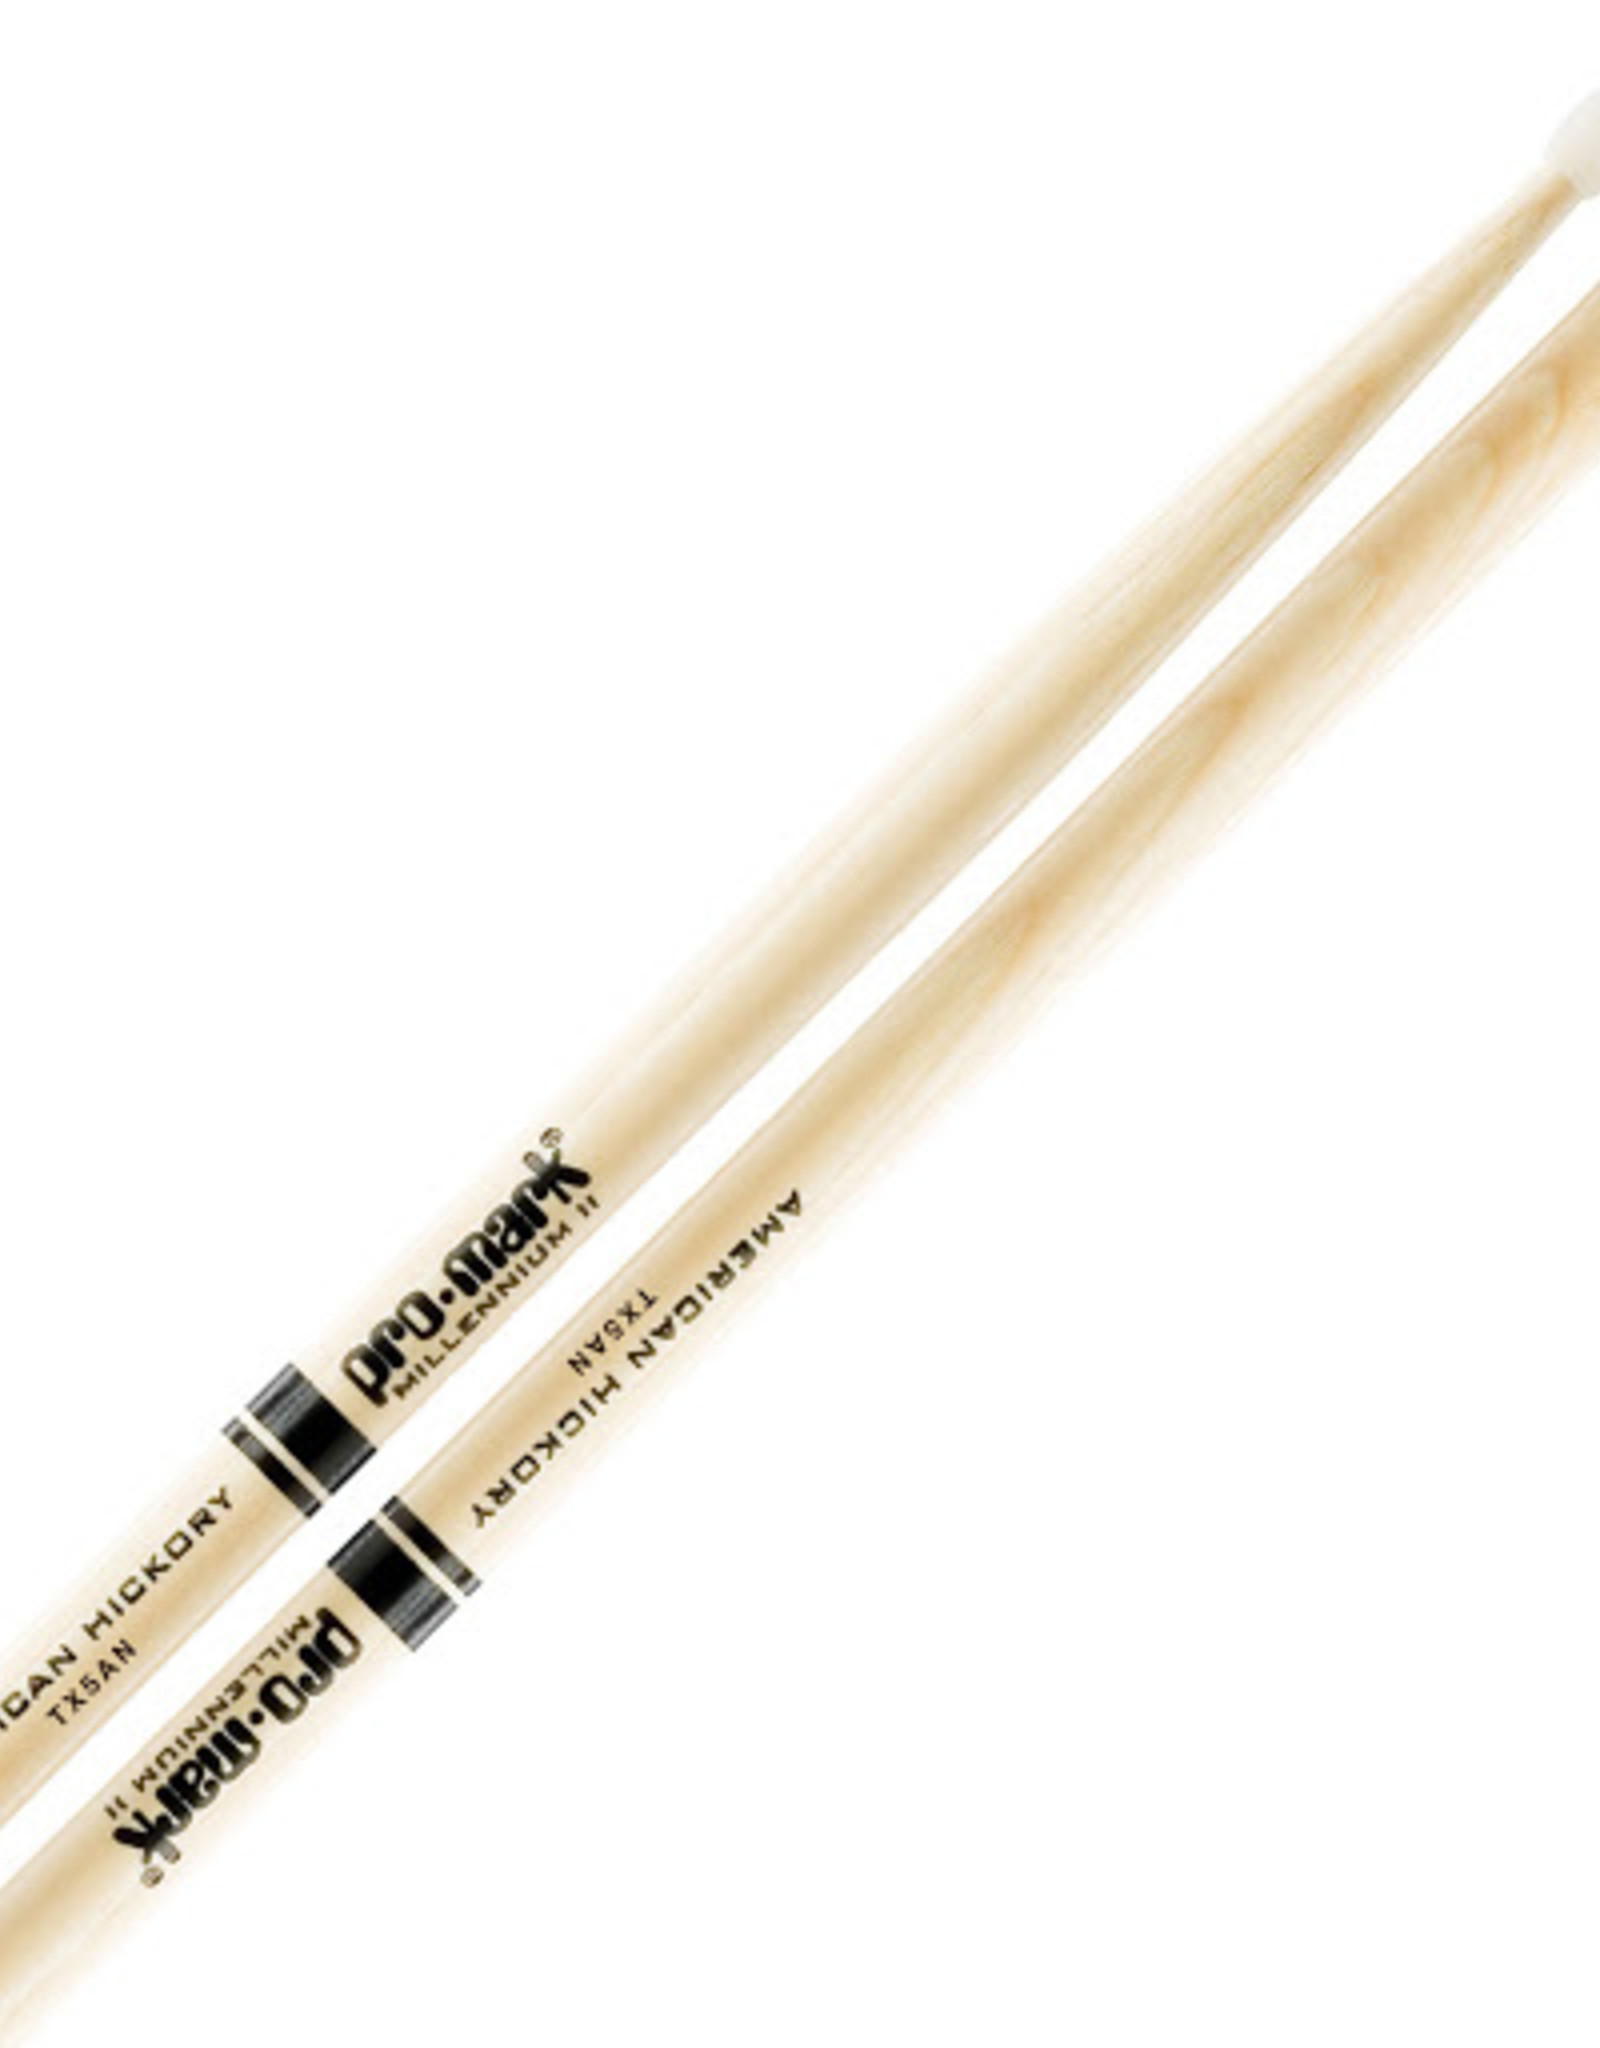 Promark ProMark Classic Forward 5A Hickory Drumstick, Oval Nylon Tip